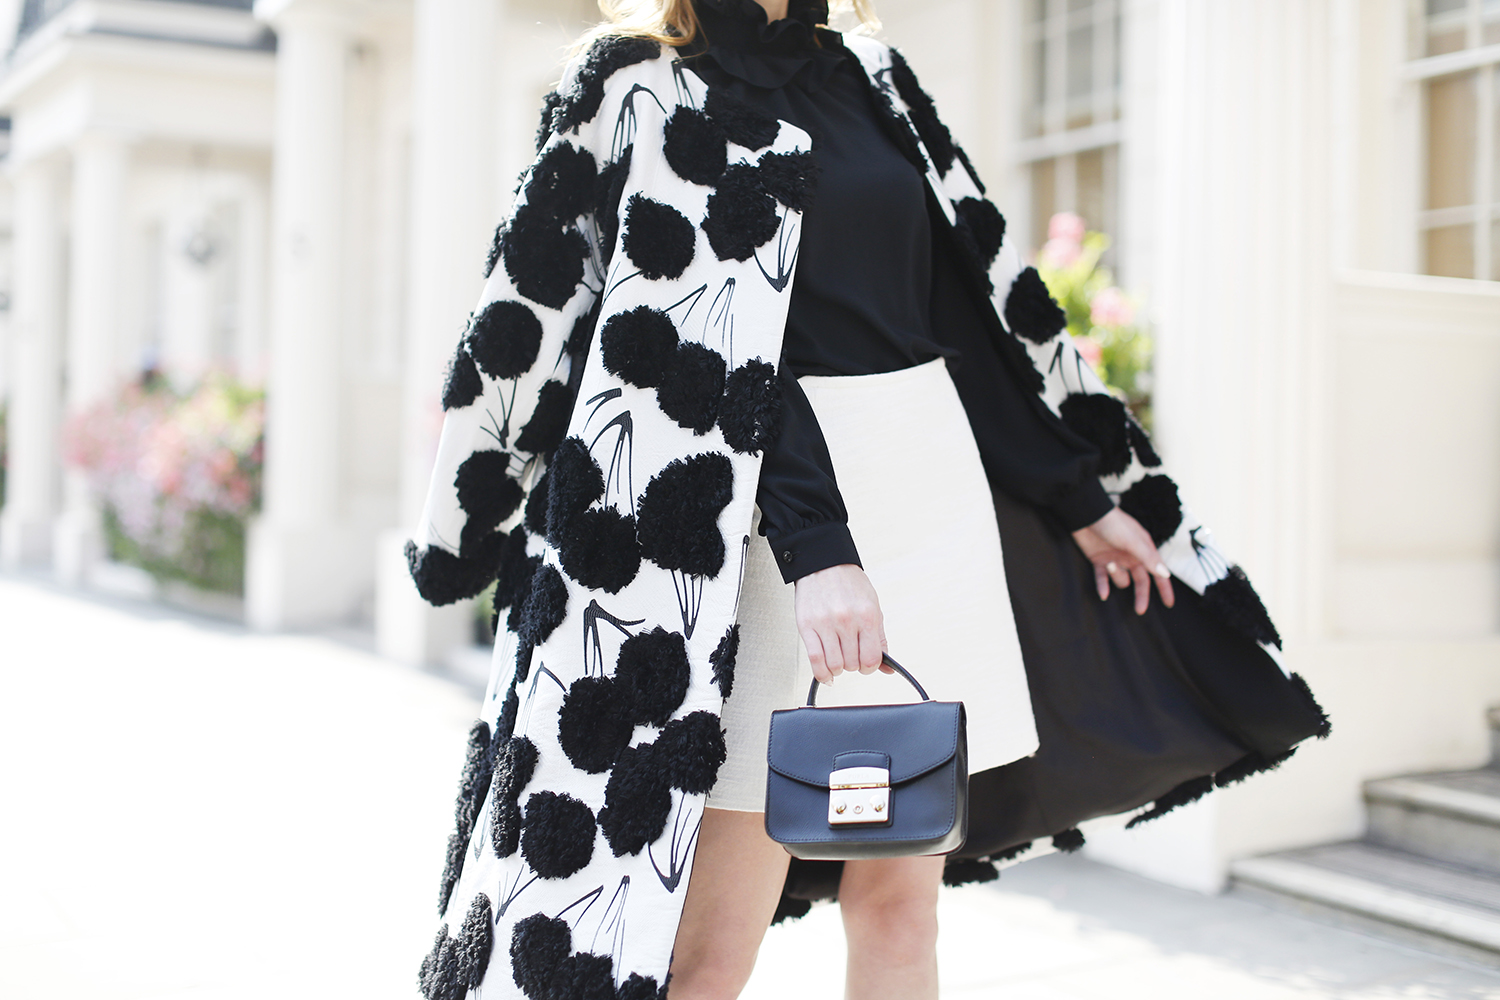 Miss USA 2011 Alyssa Campanella of The A List blog wearing Milly by Michelle Smith couture coat in London for LFW